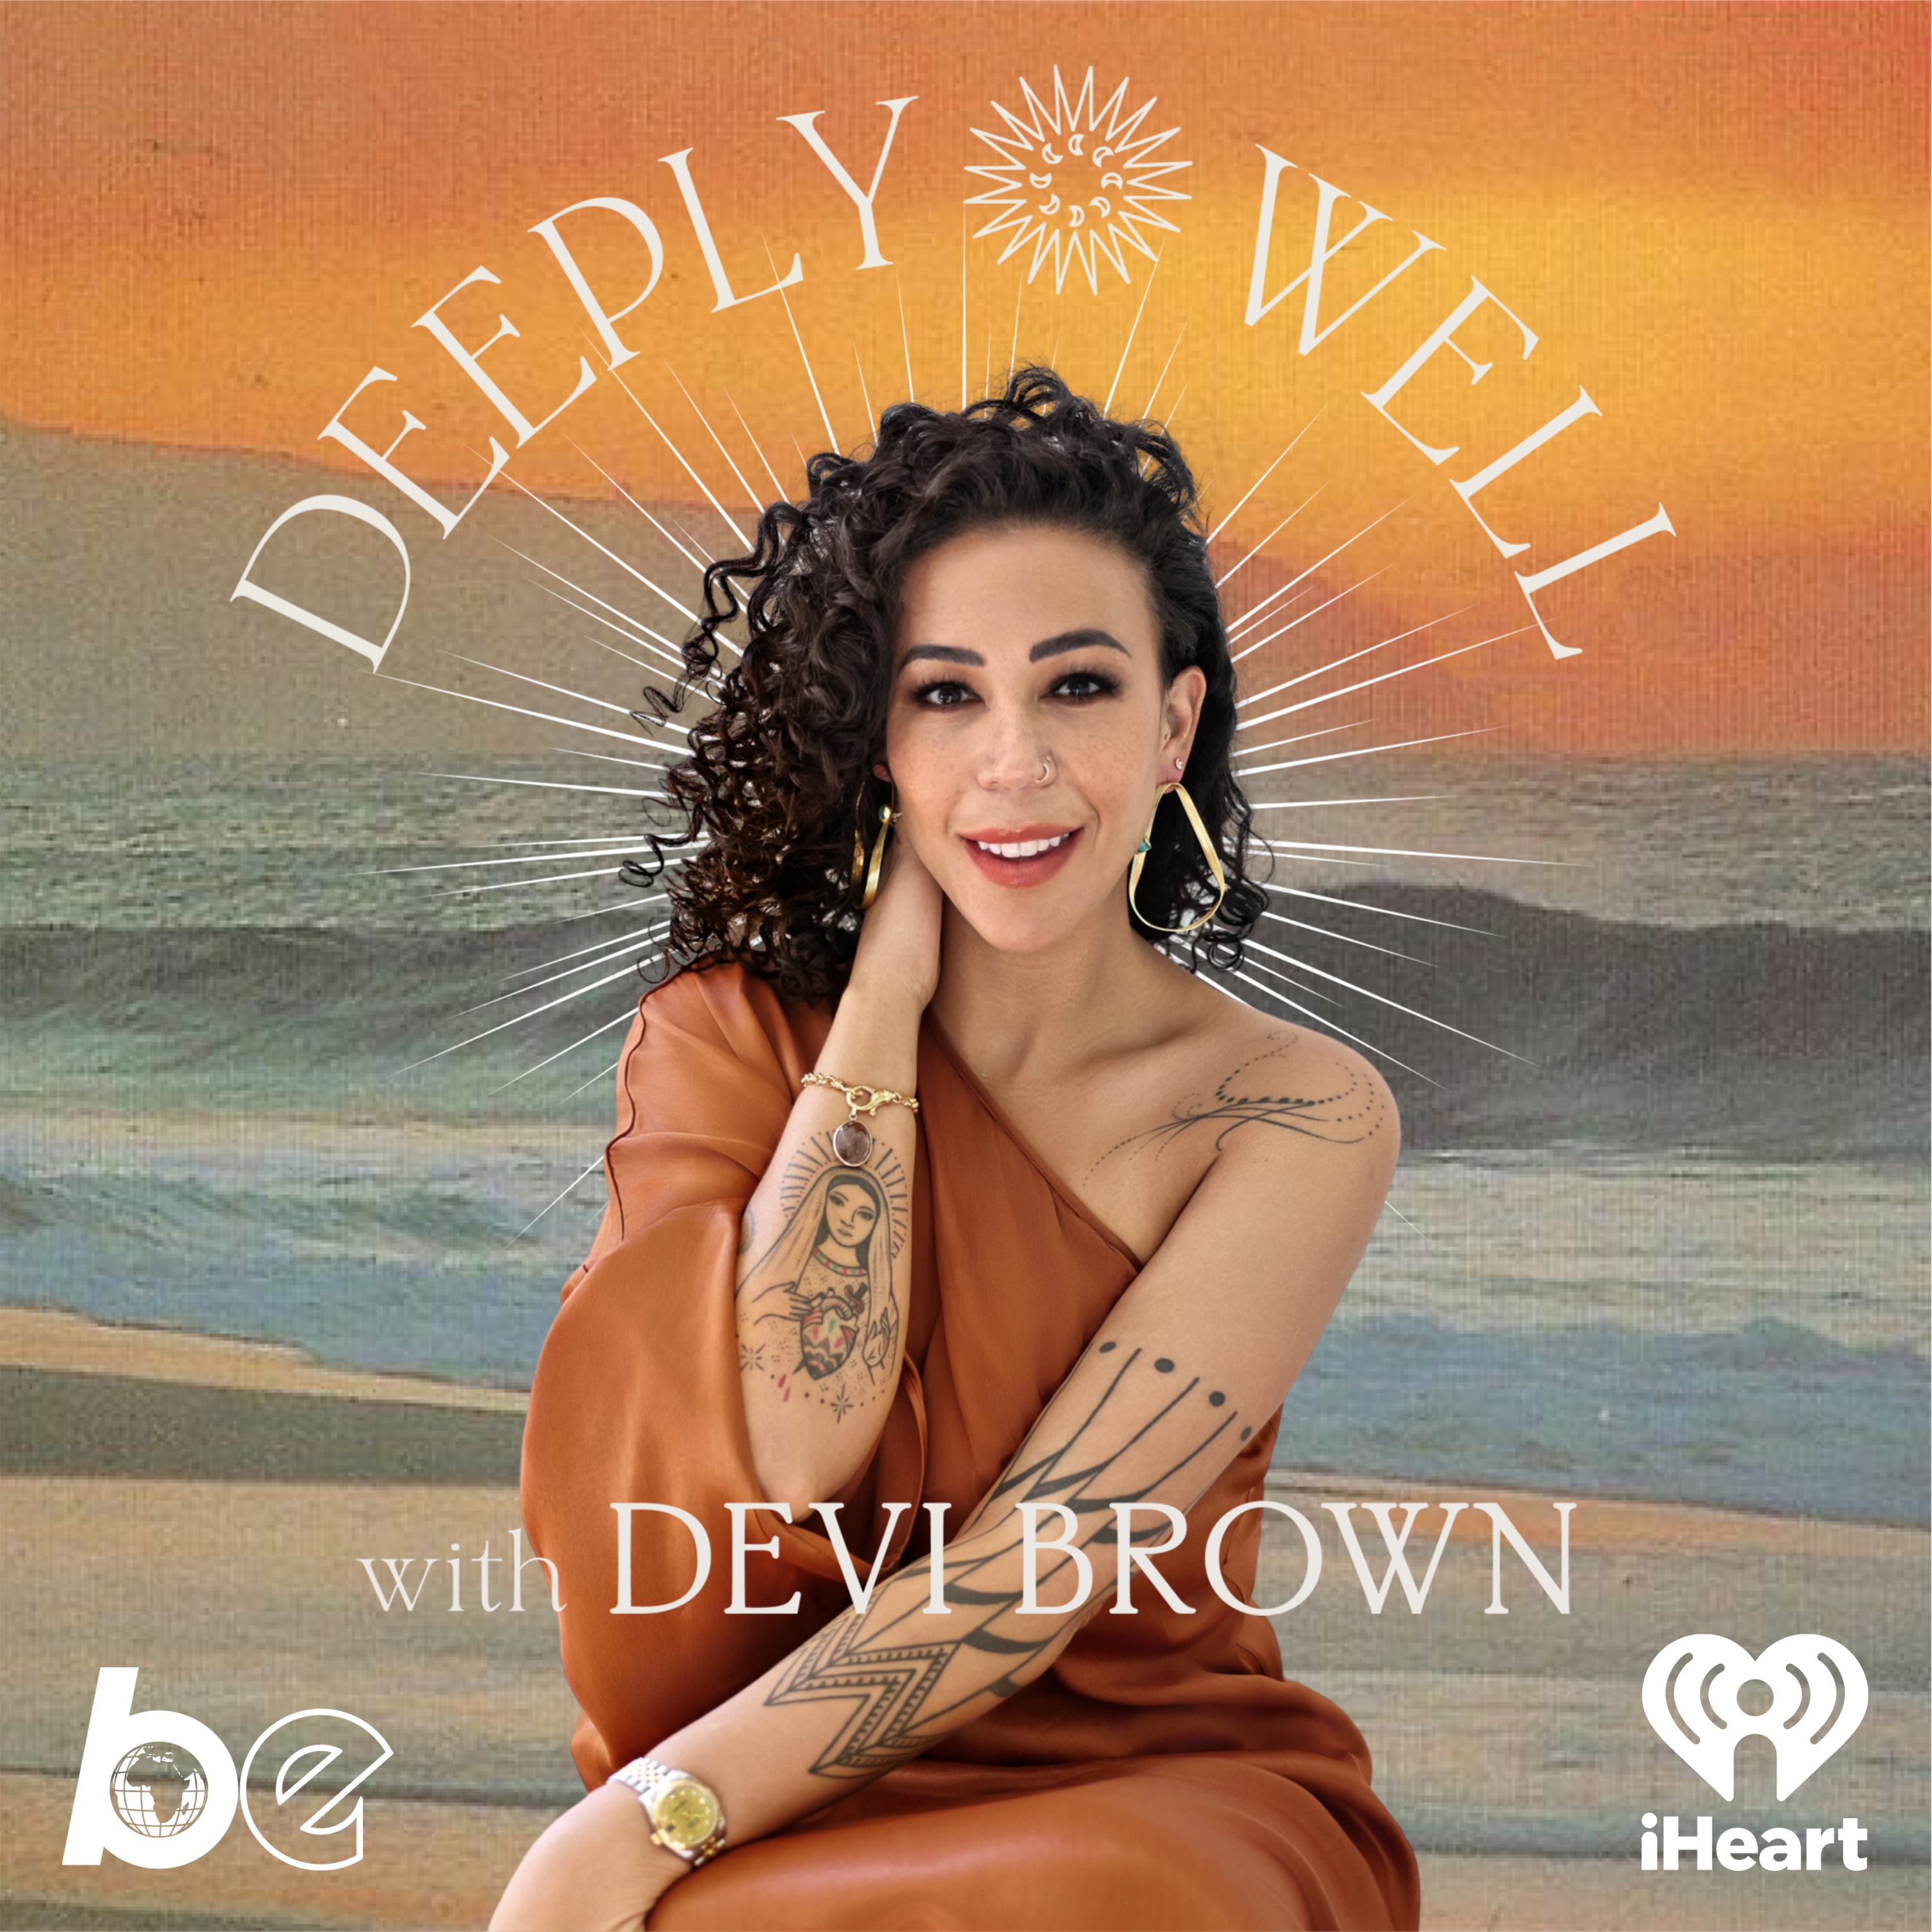 Q & A with Devi Brown